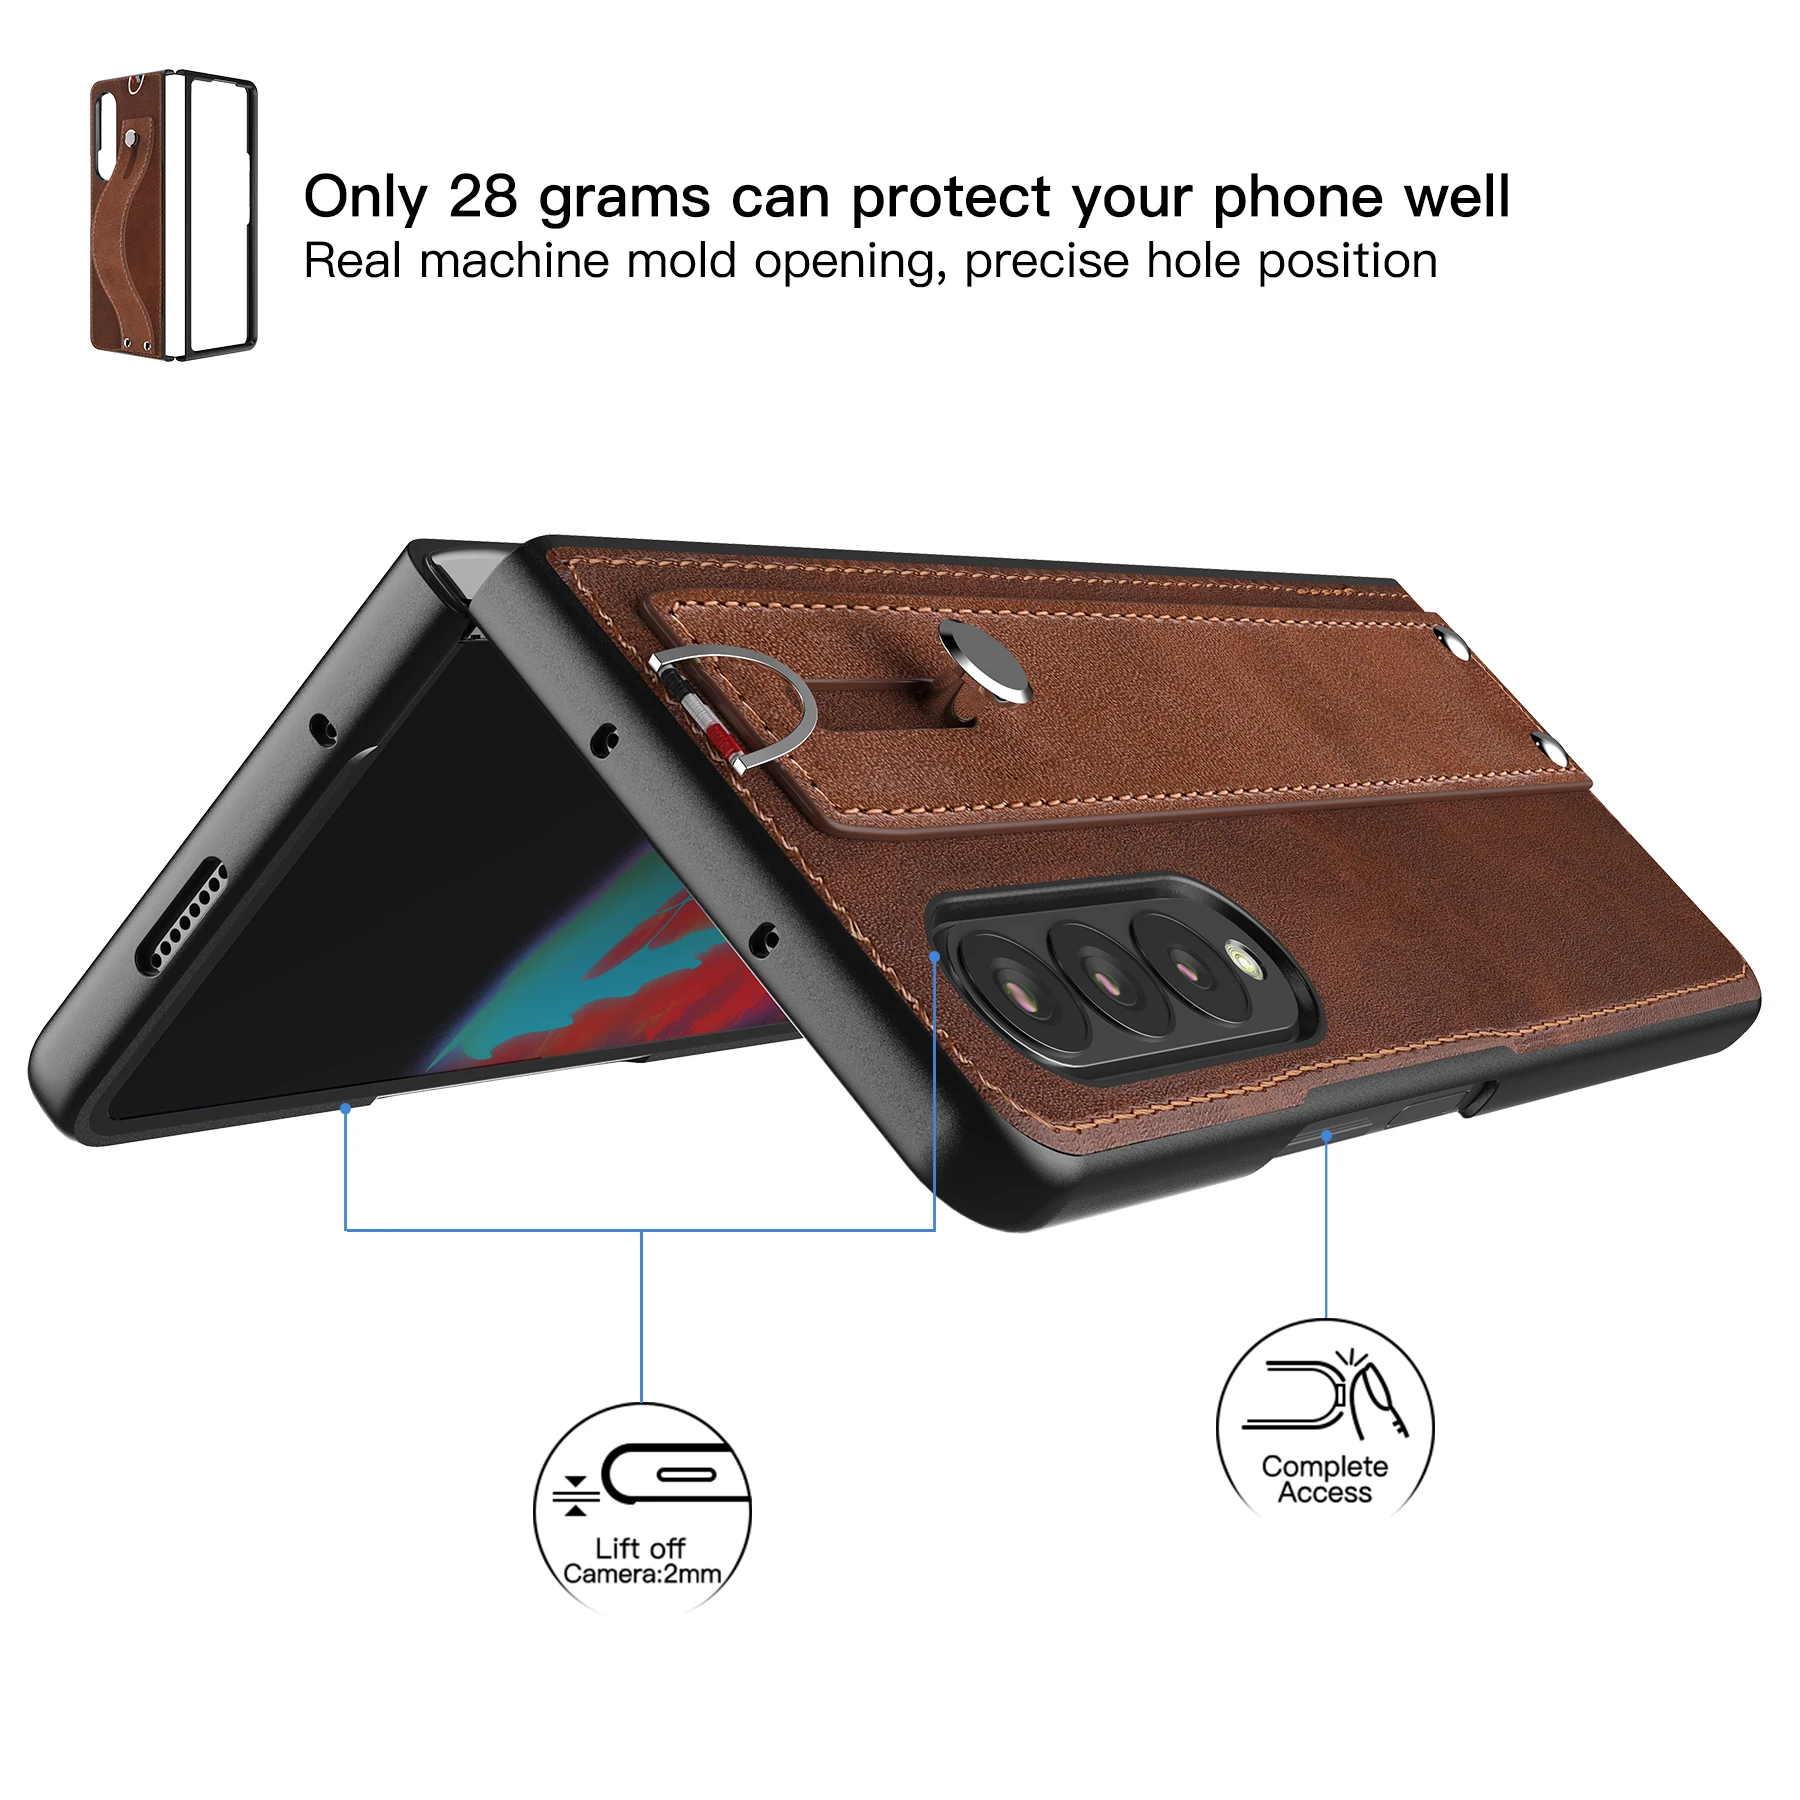 case for samsung galaxy z fold 3 5g slim lightweight genuine leather hand strap protective shockproof cover for z fold 3 free global shipping